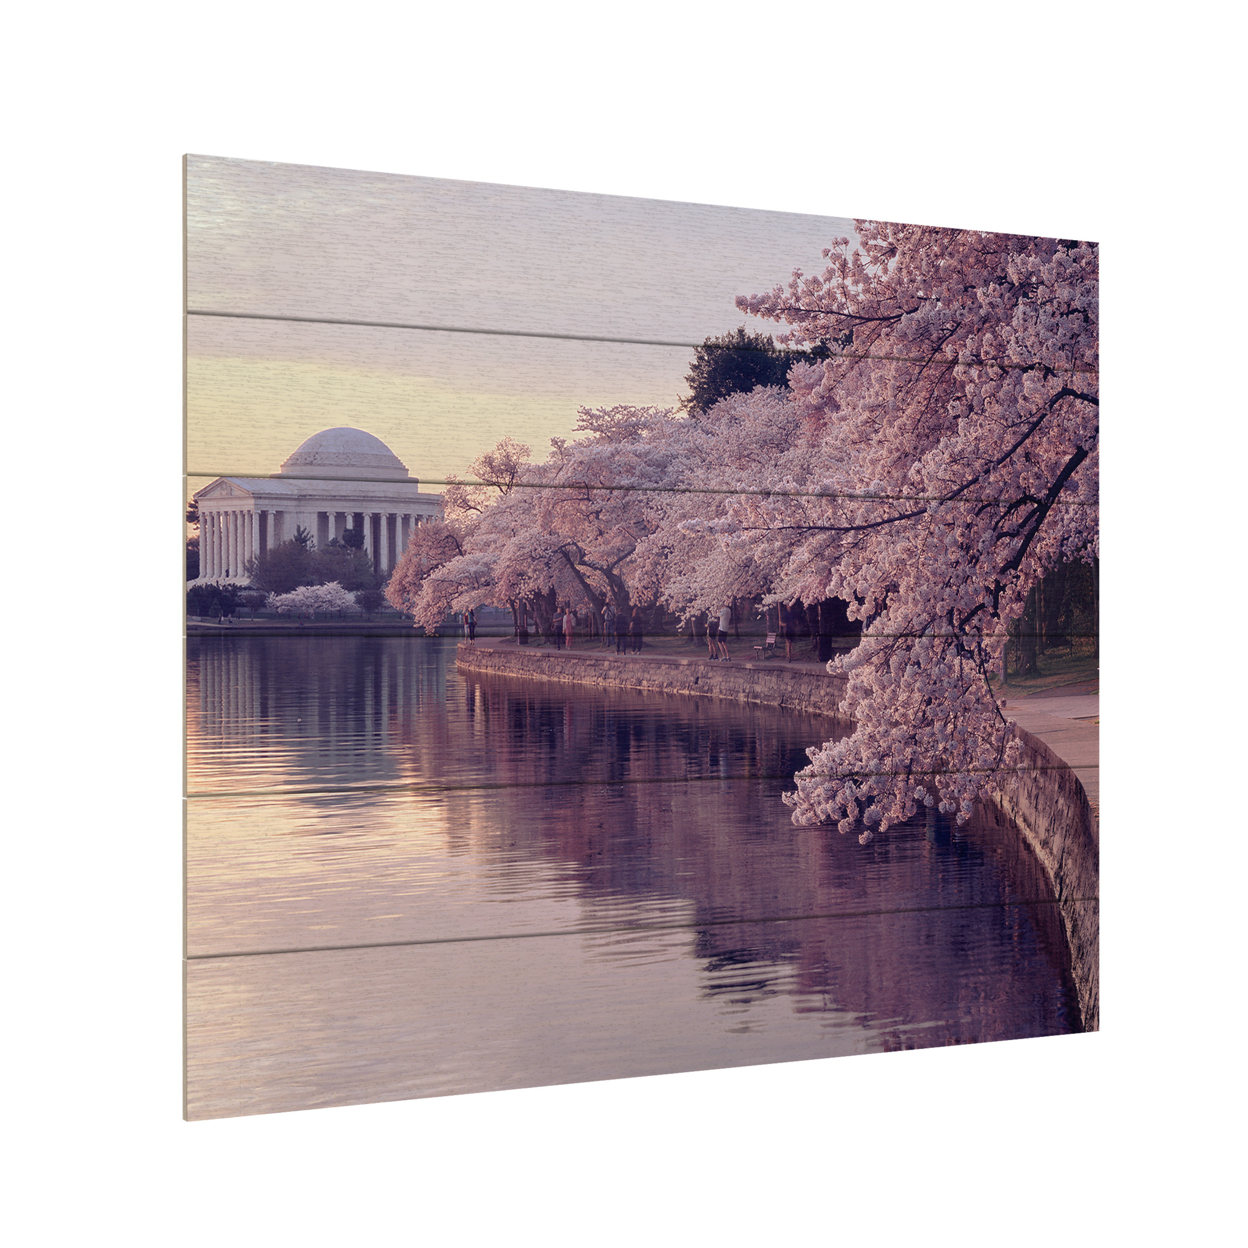 Wooden Slat Art 18 X 22 Inches Titled Cherry Blossoms Jefferson Memorial Ready To Hang Home Decor Picture